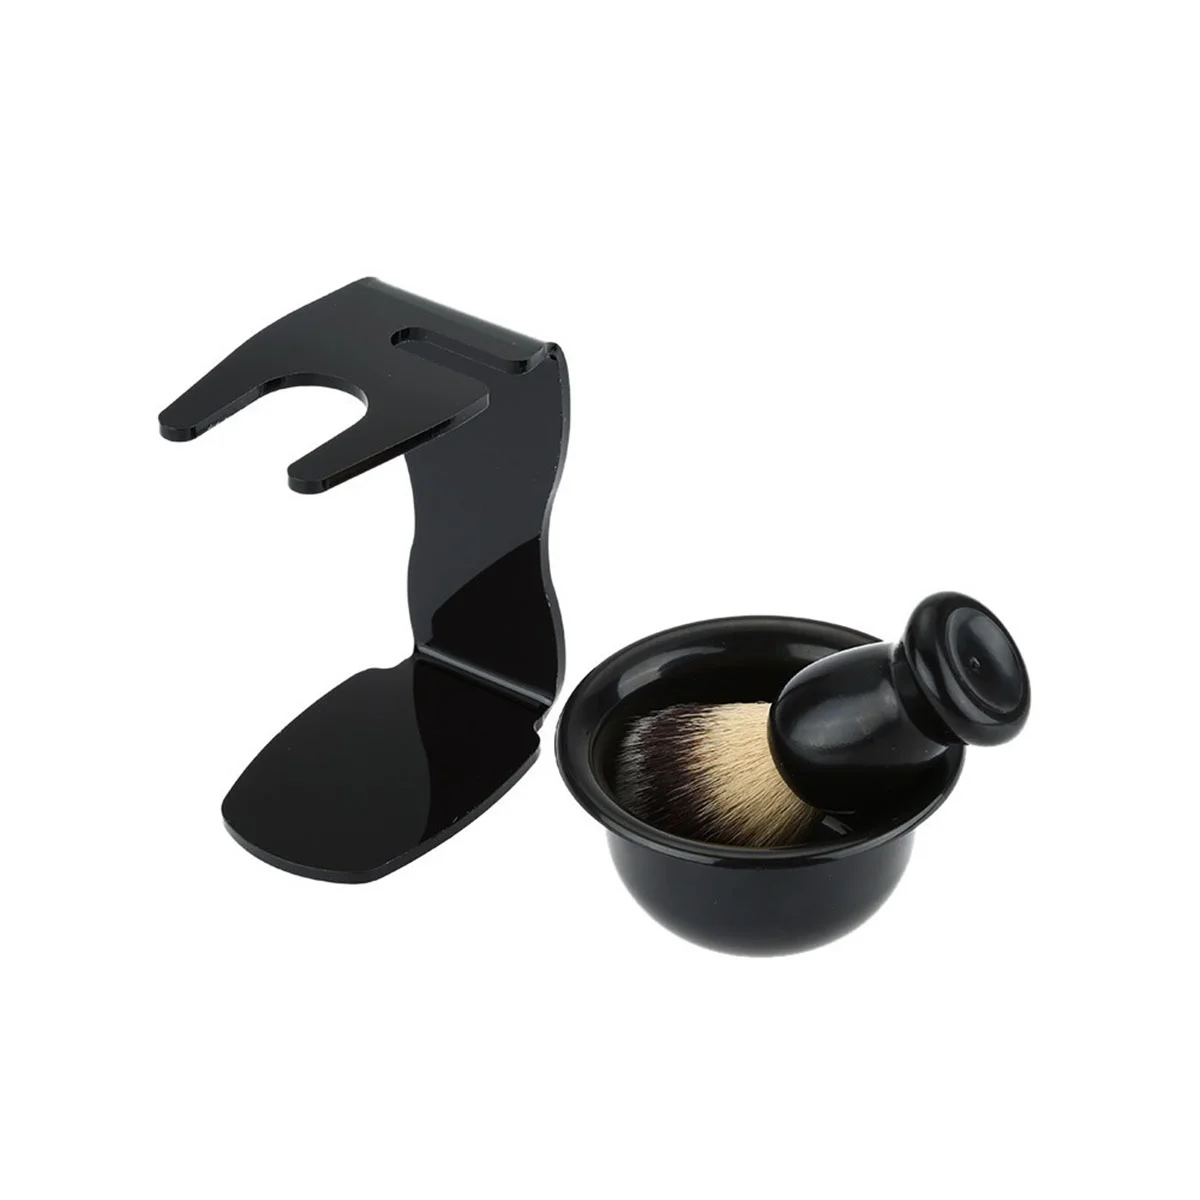 

Mens Shaving Grooming Sets Shave Bowl and Shaving Stand Brush for Safety and Double Edge